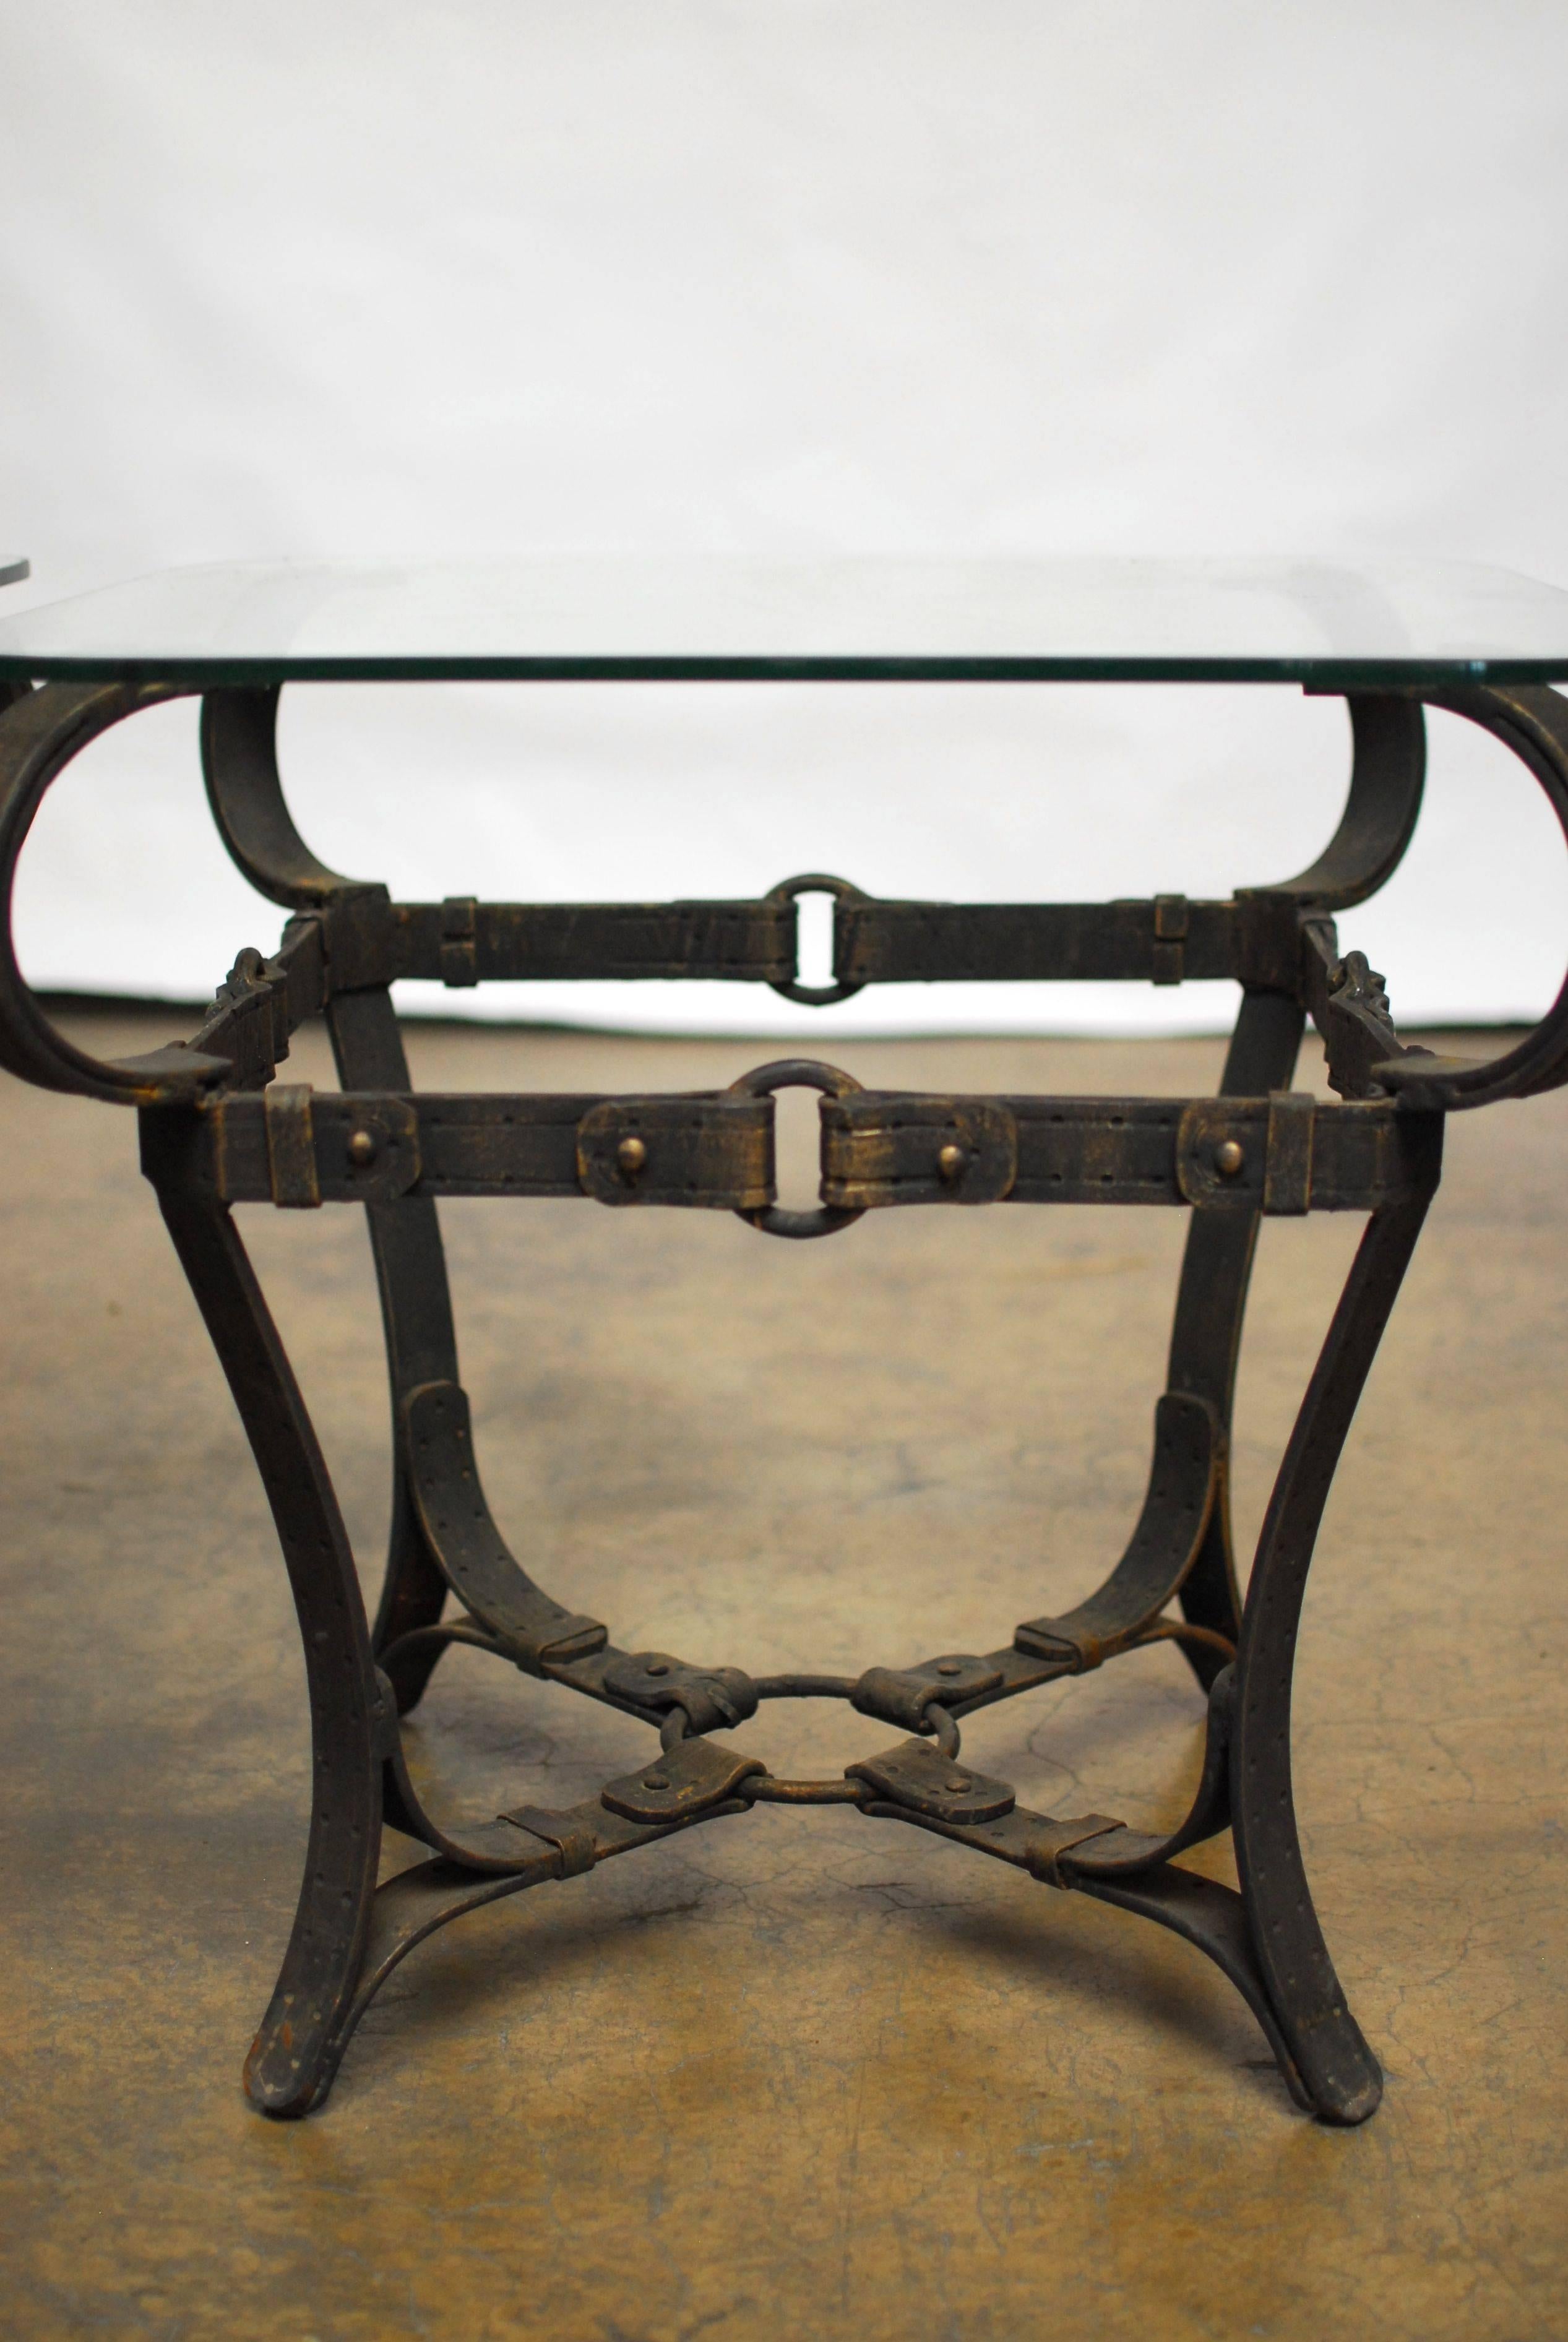 Chic pair of end tables made in the manner of Adnet. Constructed of cast iron faux leather equestrian straps, rings and buckles. With Classic intricate details, vintage patina and a nod to Hermes. Each features a square glass pane with rounded edges.